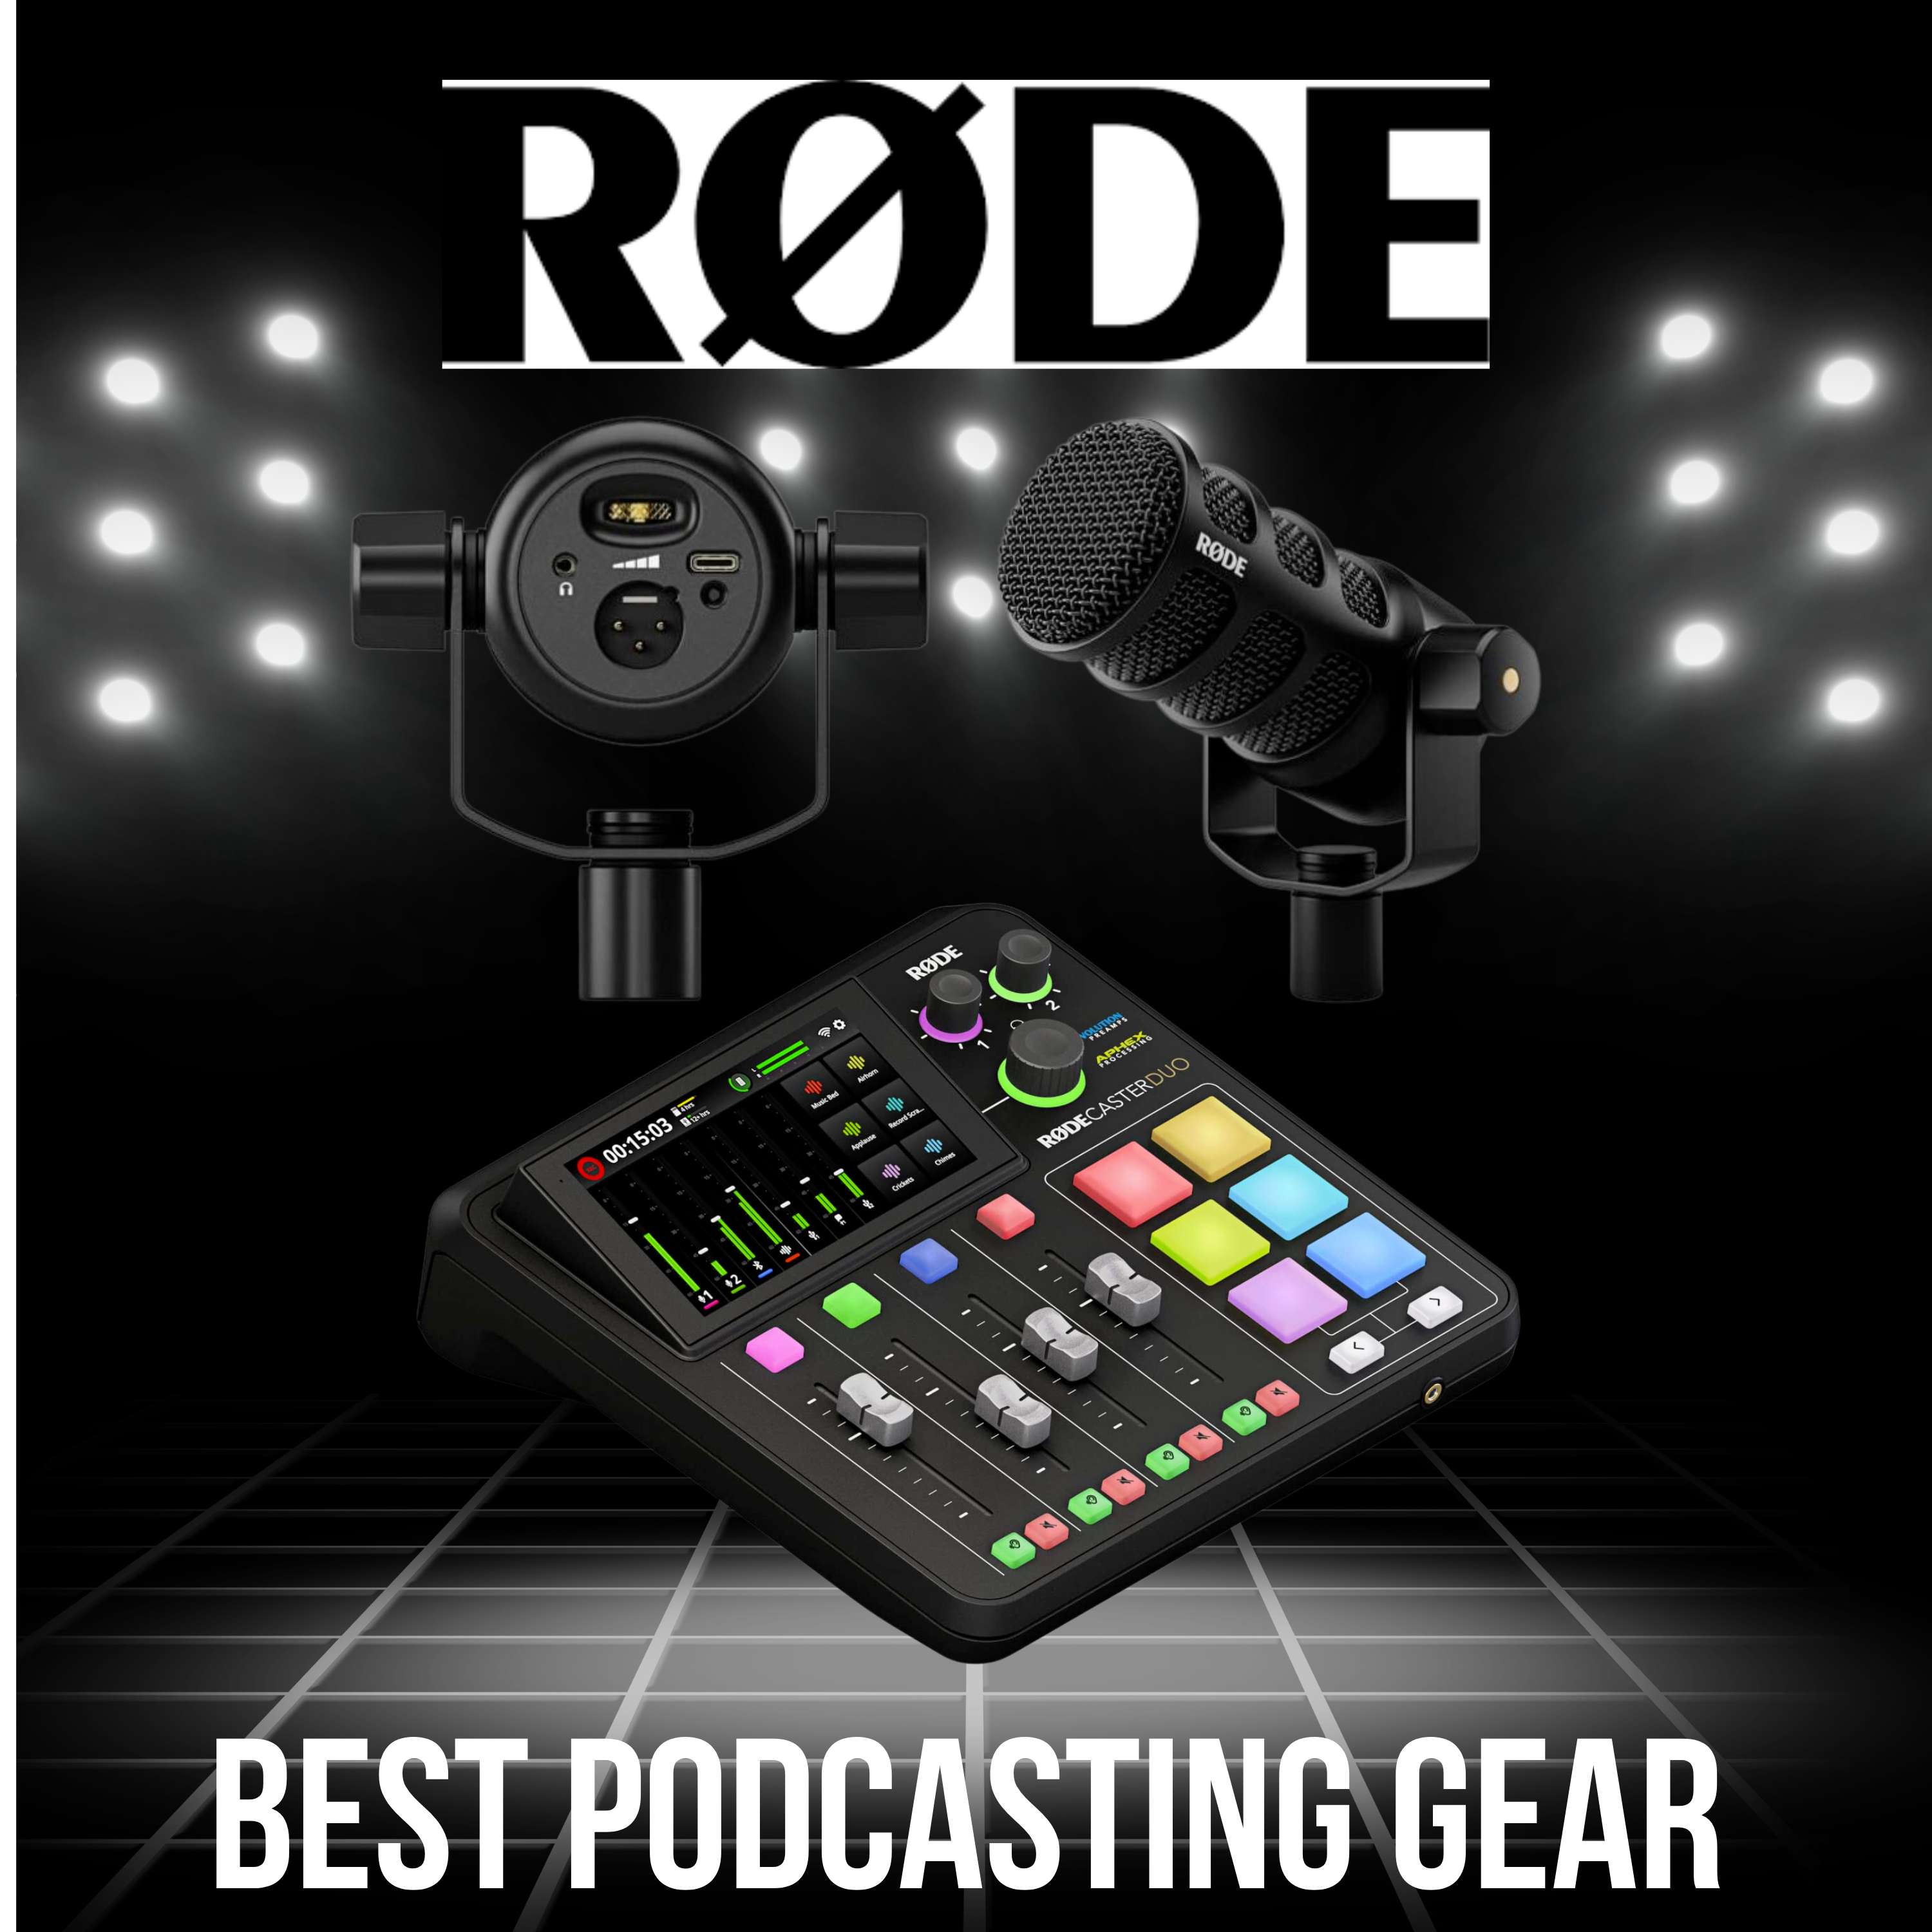 RODE NT1 microphone for podcast, voice over, livestream, and Zoom calls 